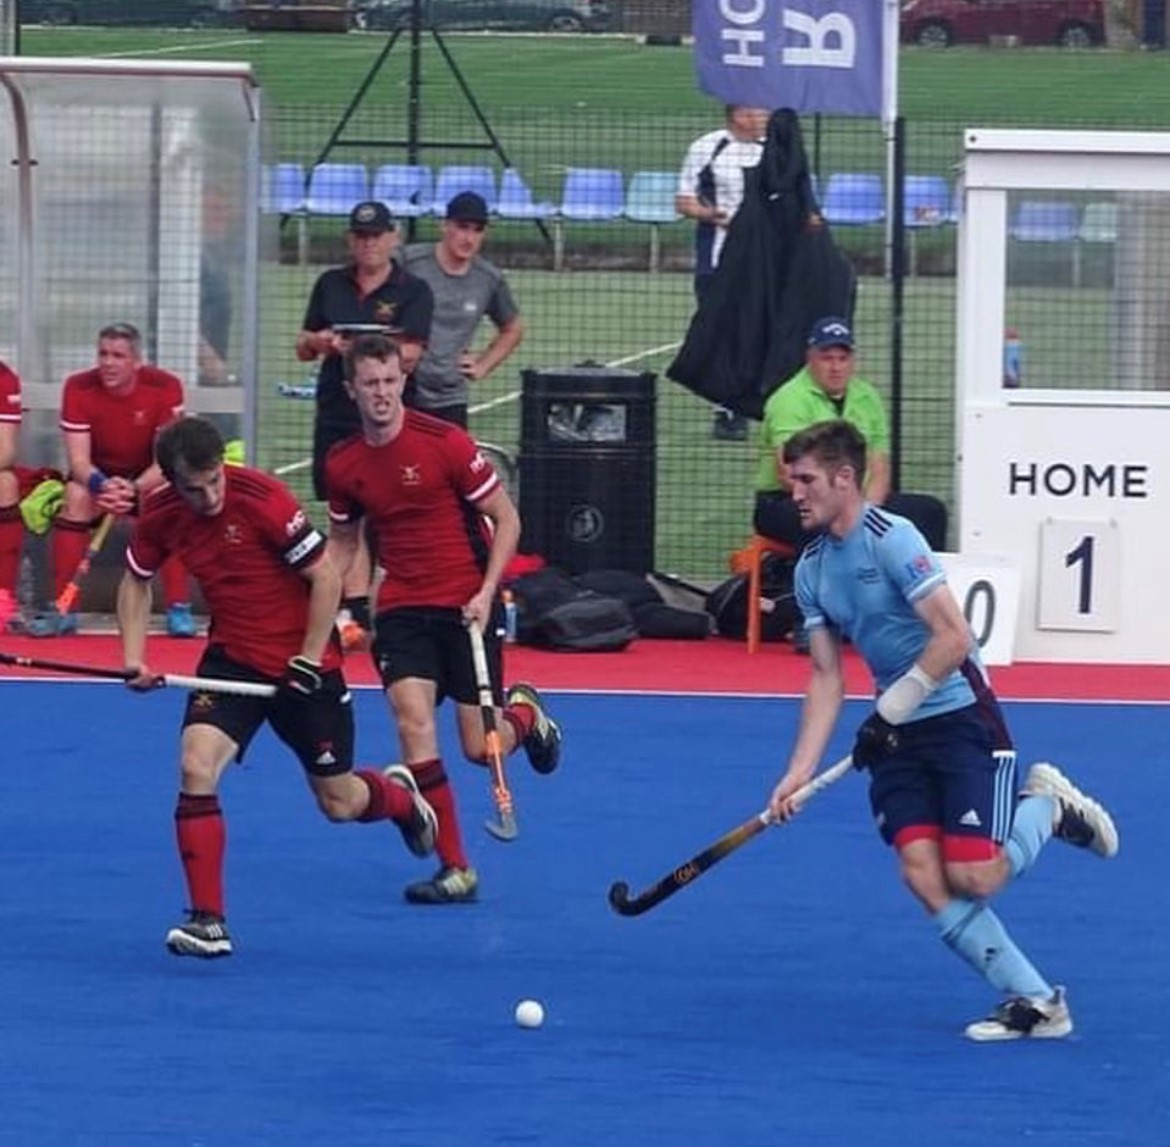 Image shows hockey players on the pitch during a game.